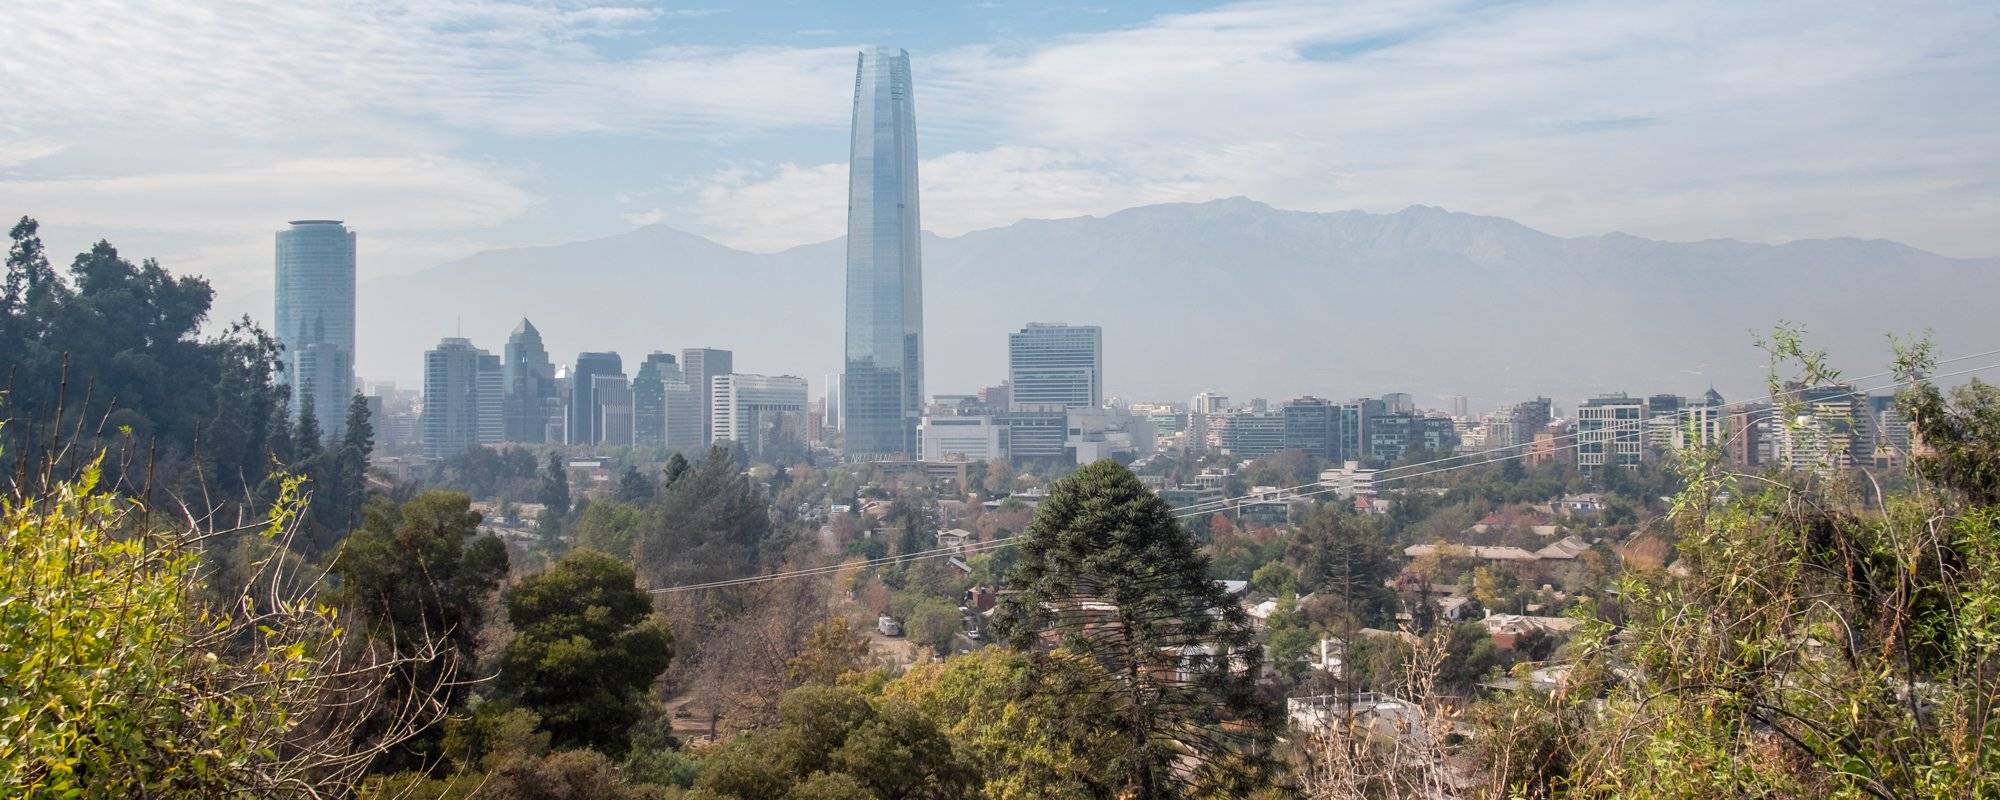 The Tallest Building In Latin America!